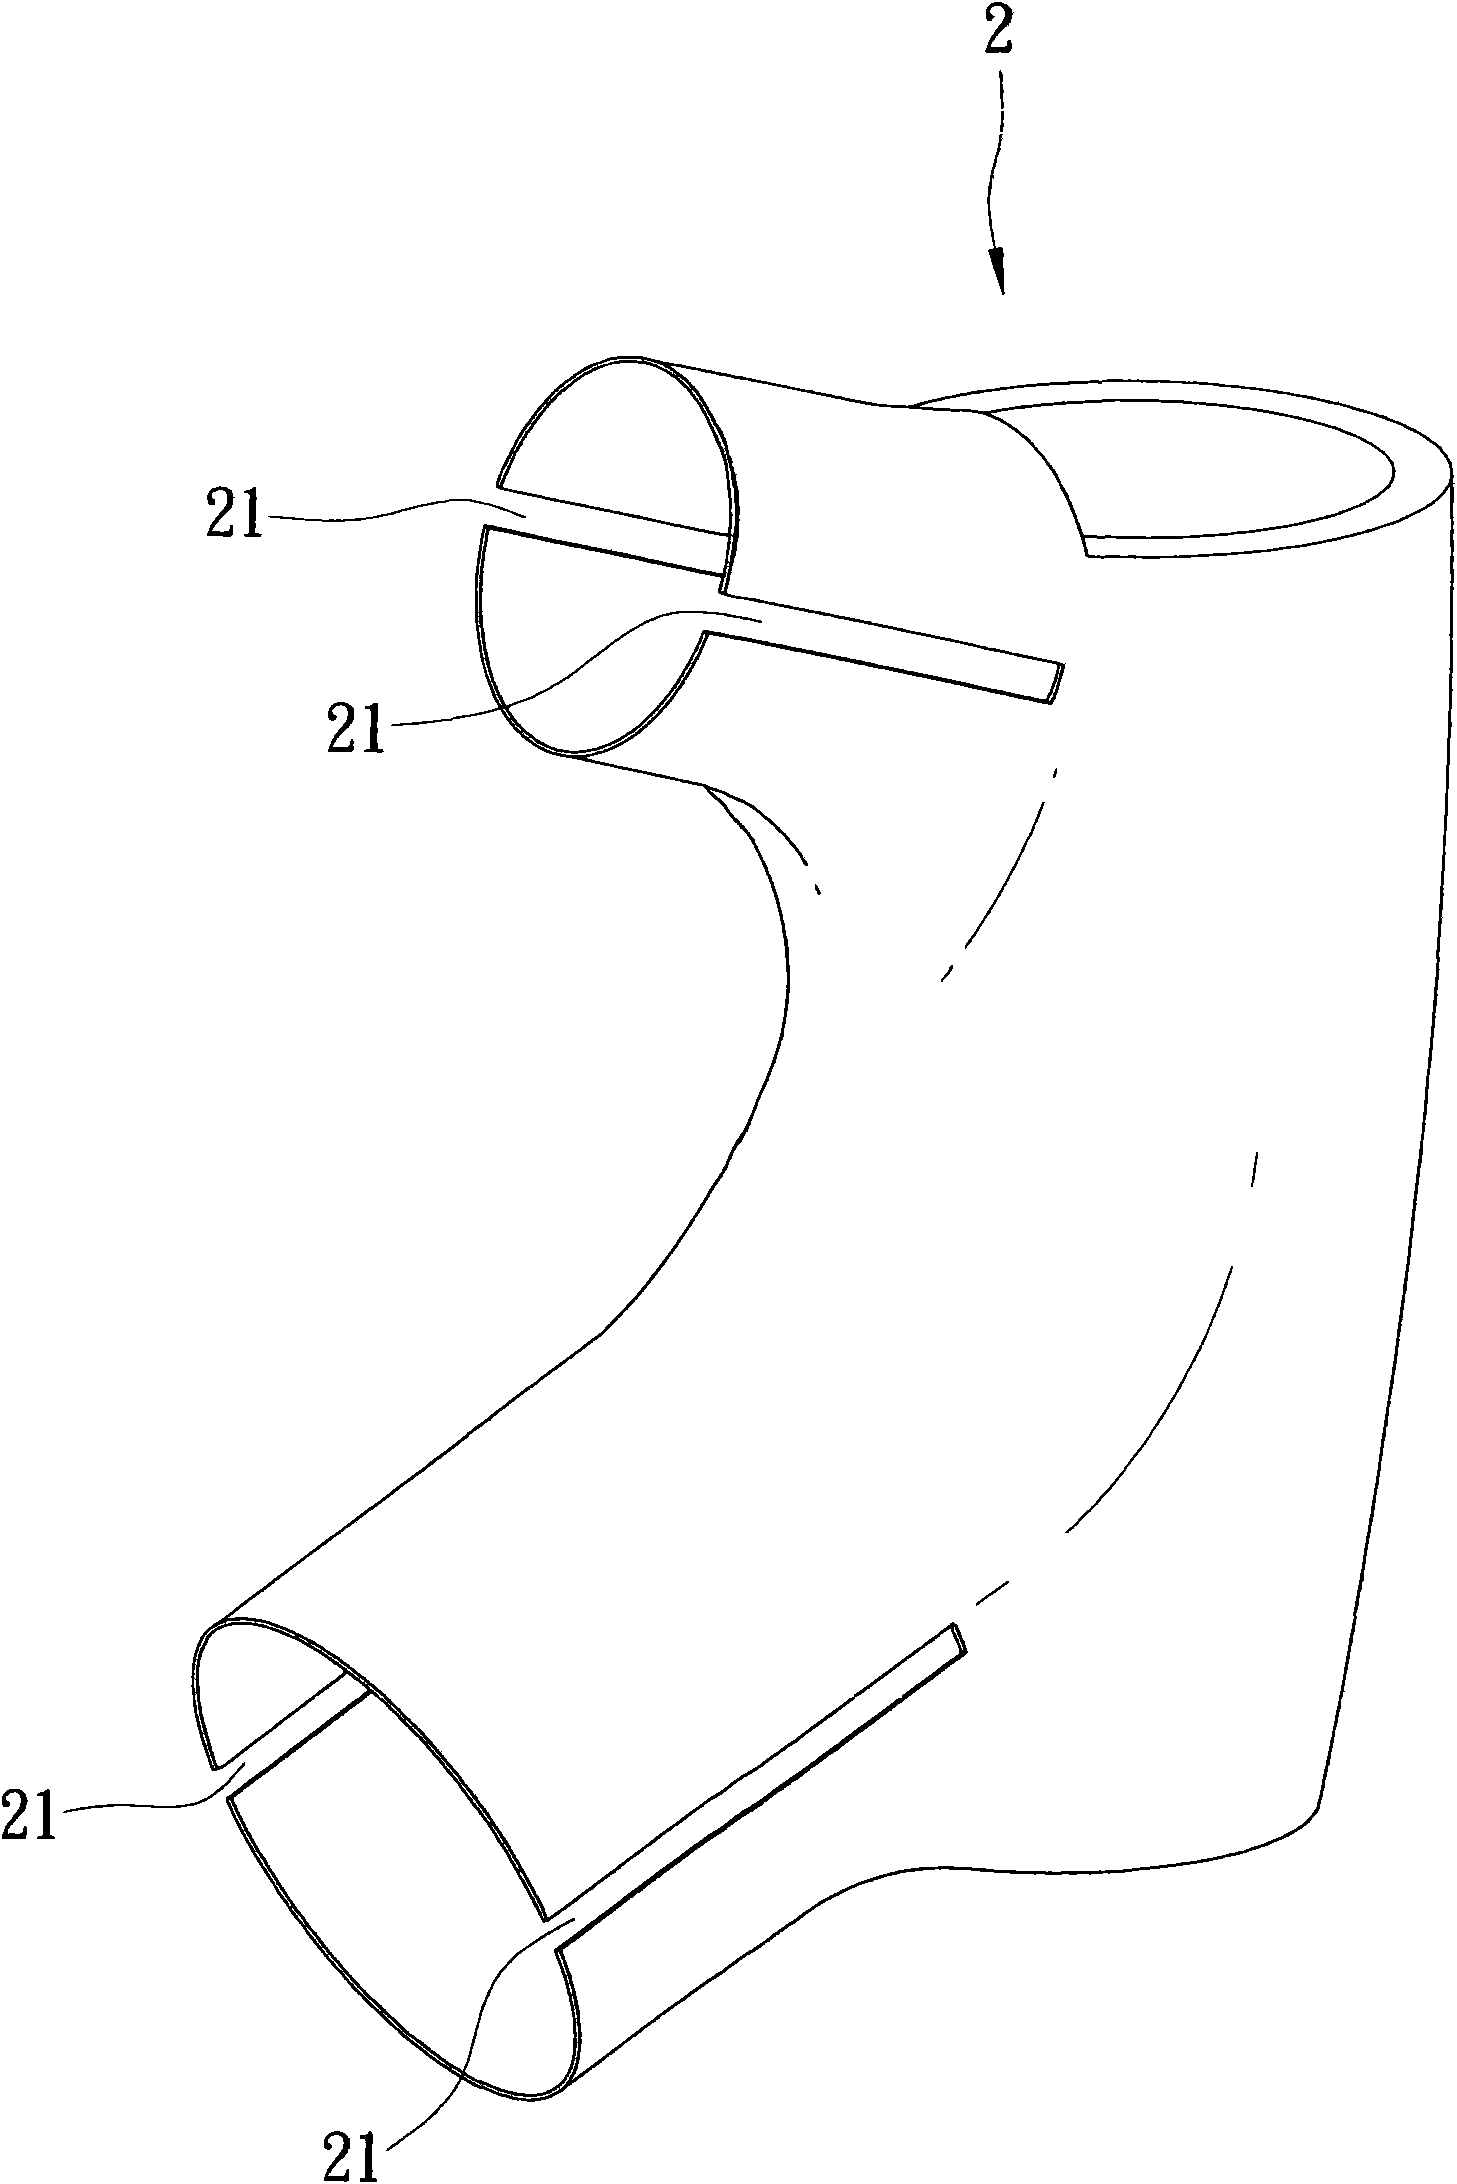 Method for molding reinforced carbon fiber bicycle component